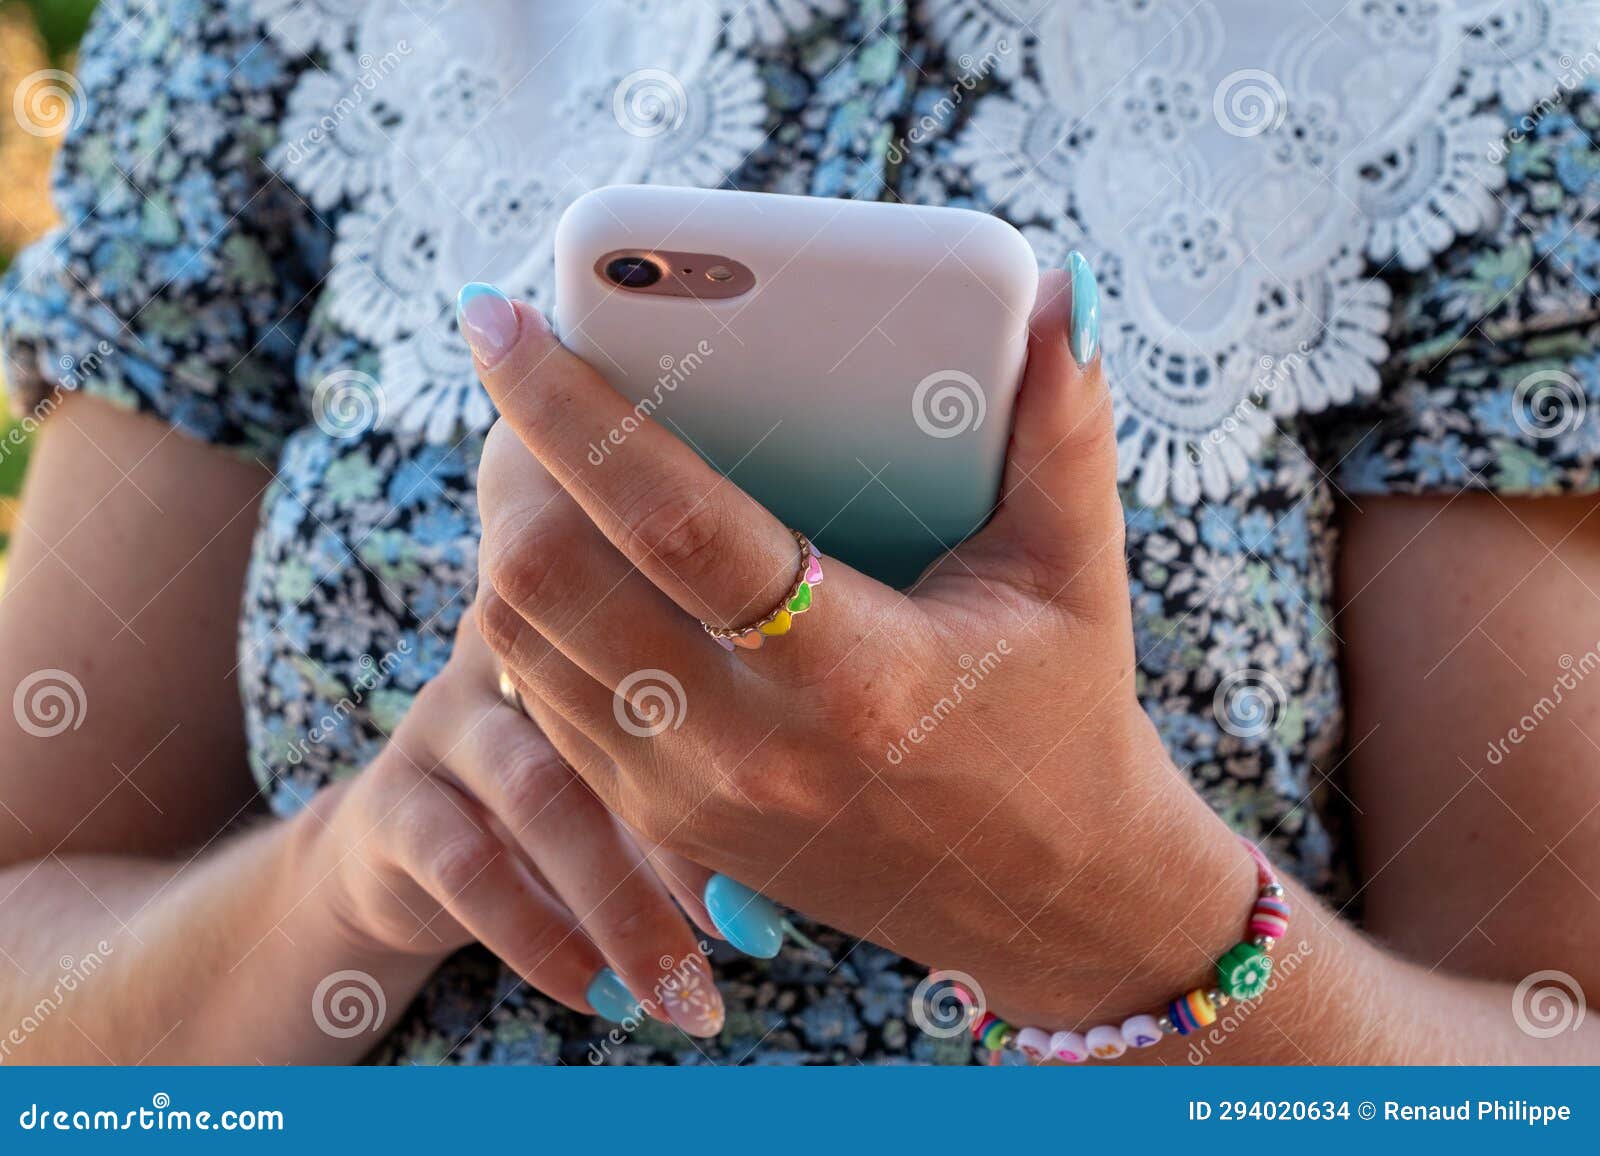 close up or woman using smart phone